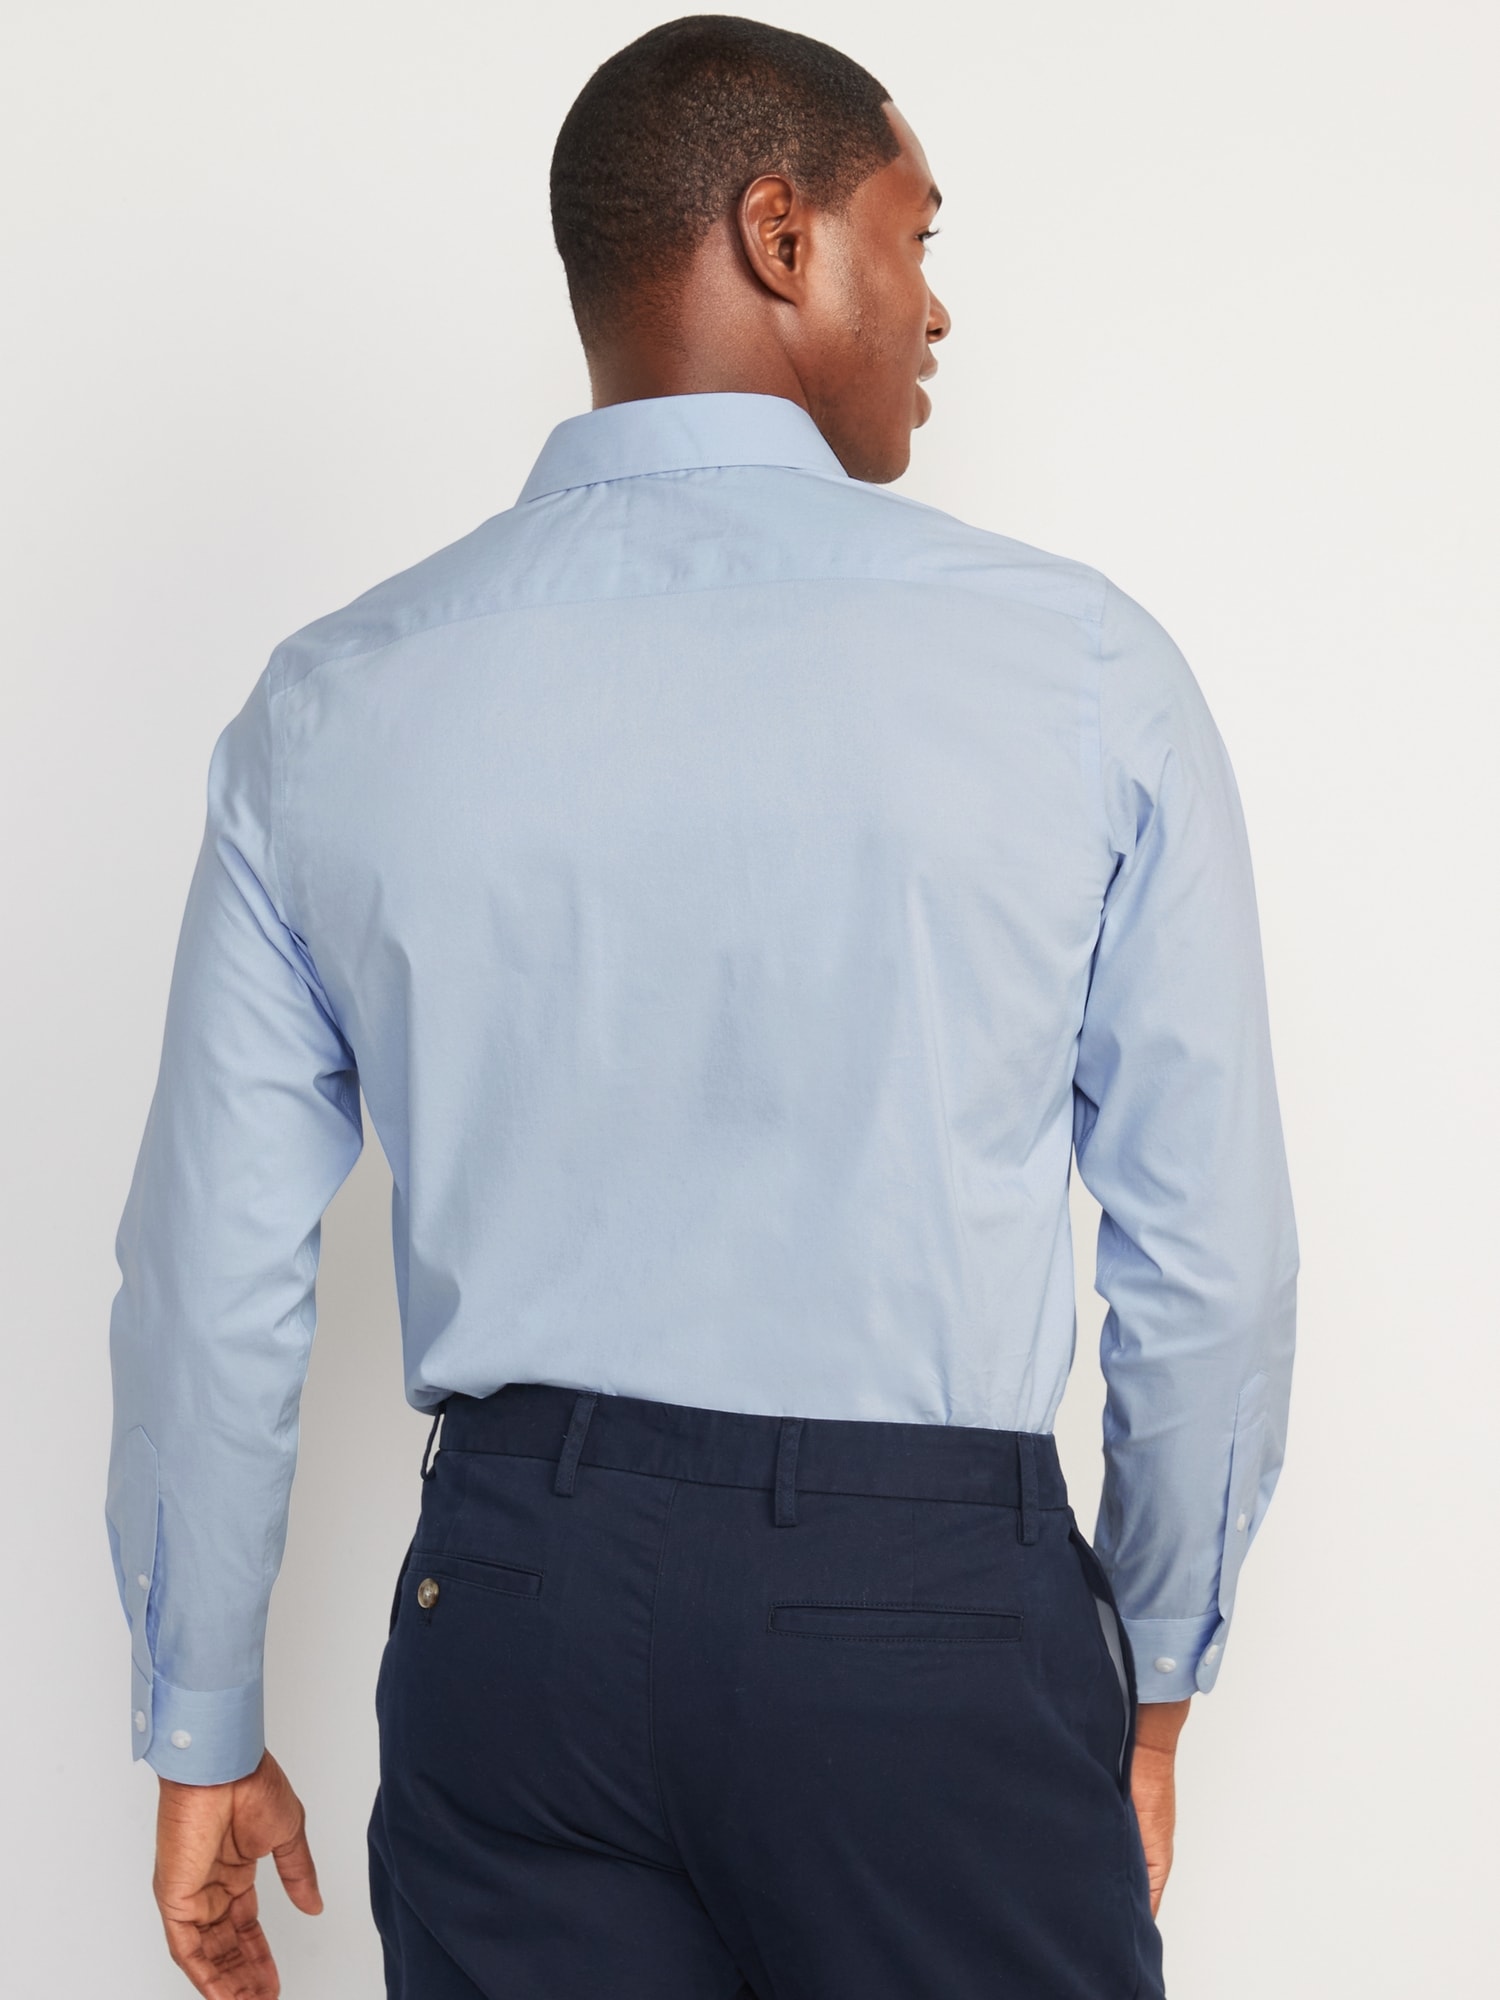 Restrict walk Silicon Regular-Fit Pro Signature Performance Dress Shirt for Men | Old Navy